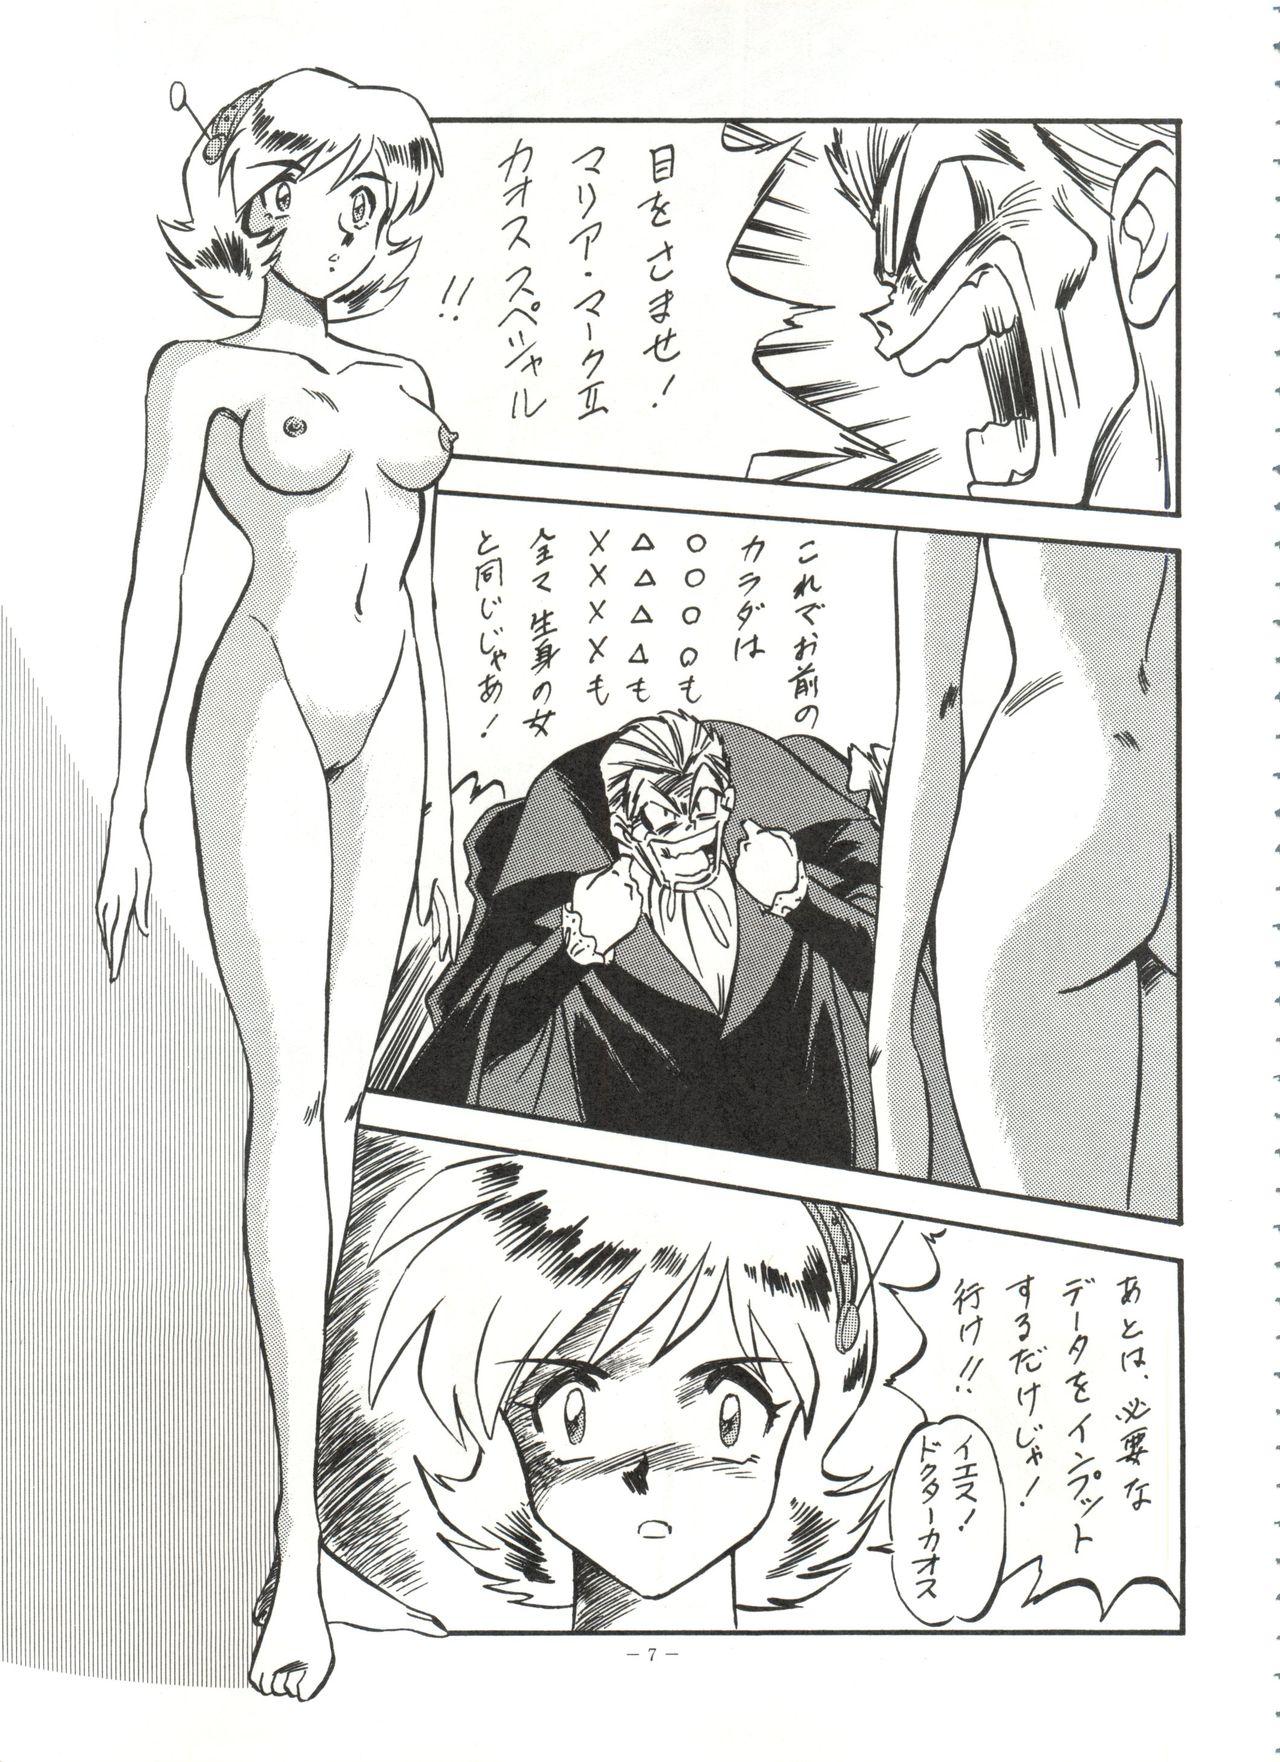 Stroking LOOK OUT 31 - Sailor moon Ghost sweeper mikami Lord of lords ryu knight Patlabor Brave police j decker Candid - Page 6